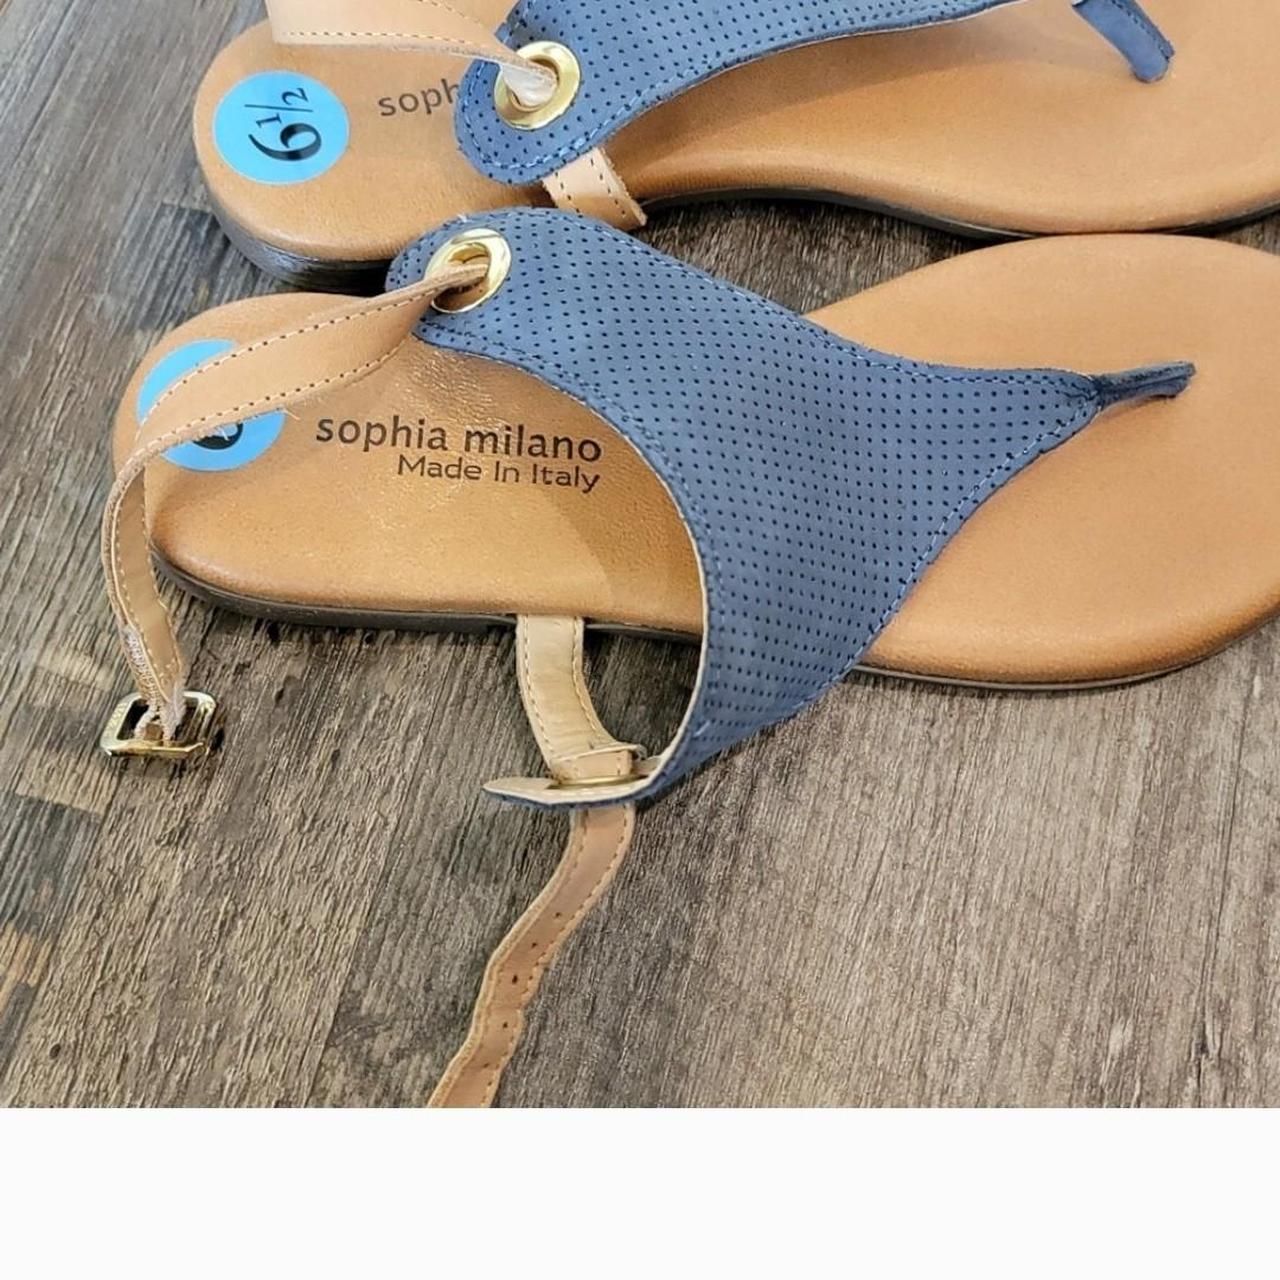 Sofia Milano sandals made in Italy size 7 - Sandals & Flip Flops